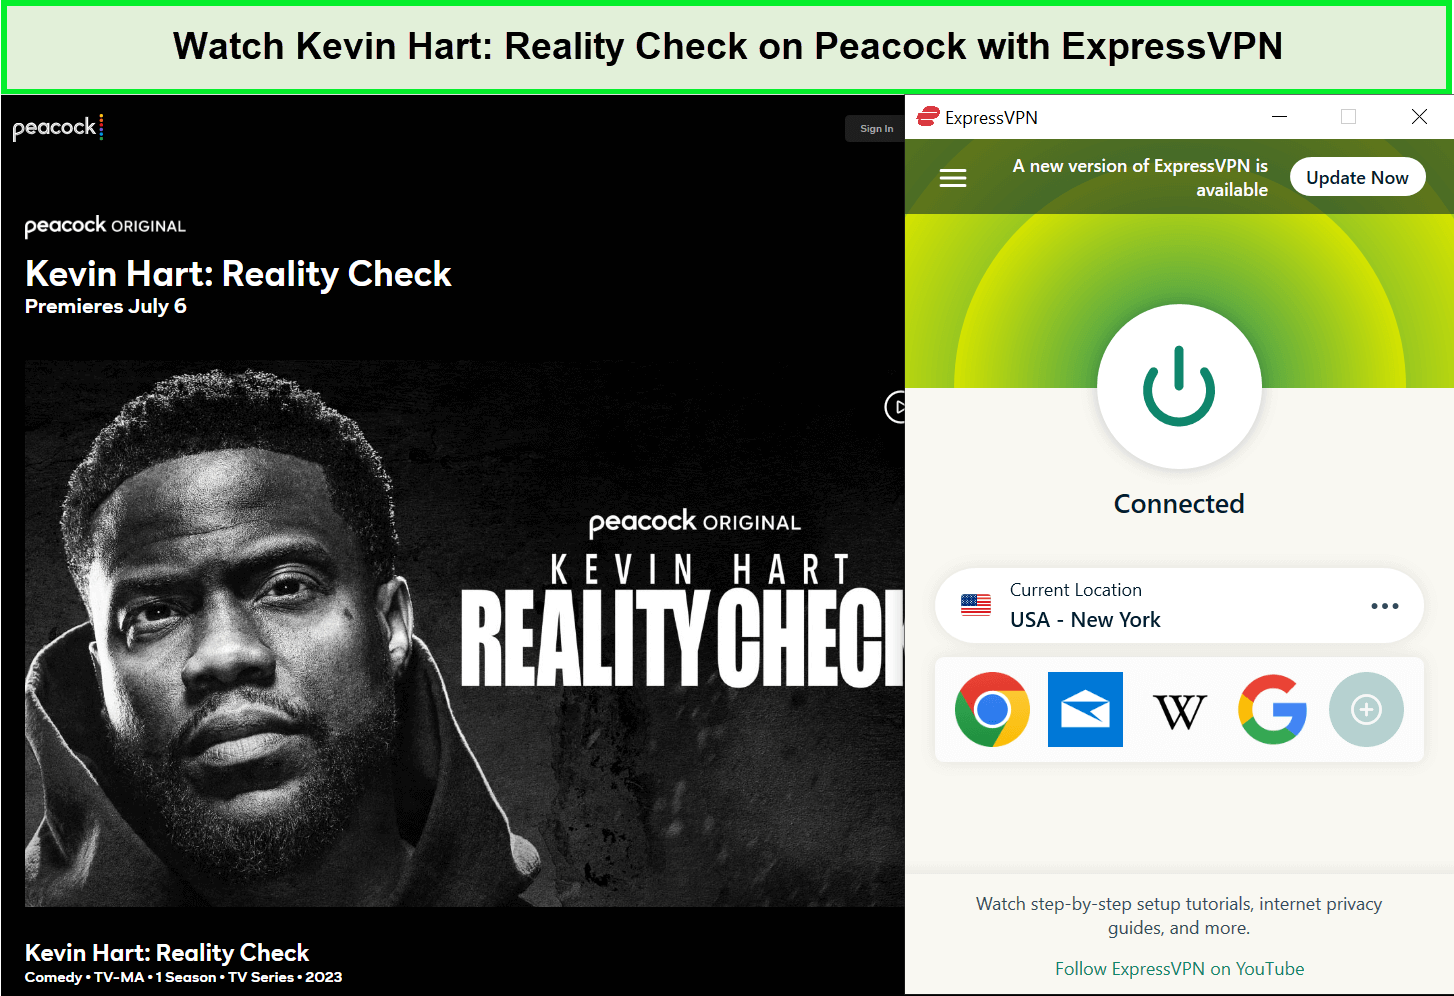 Watch-Kevin-Hart-Reality-Check-in-India-on-Peacock-with-ExpressVPN